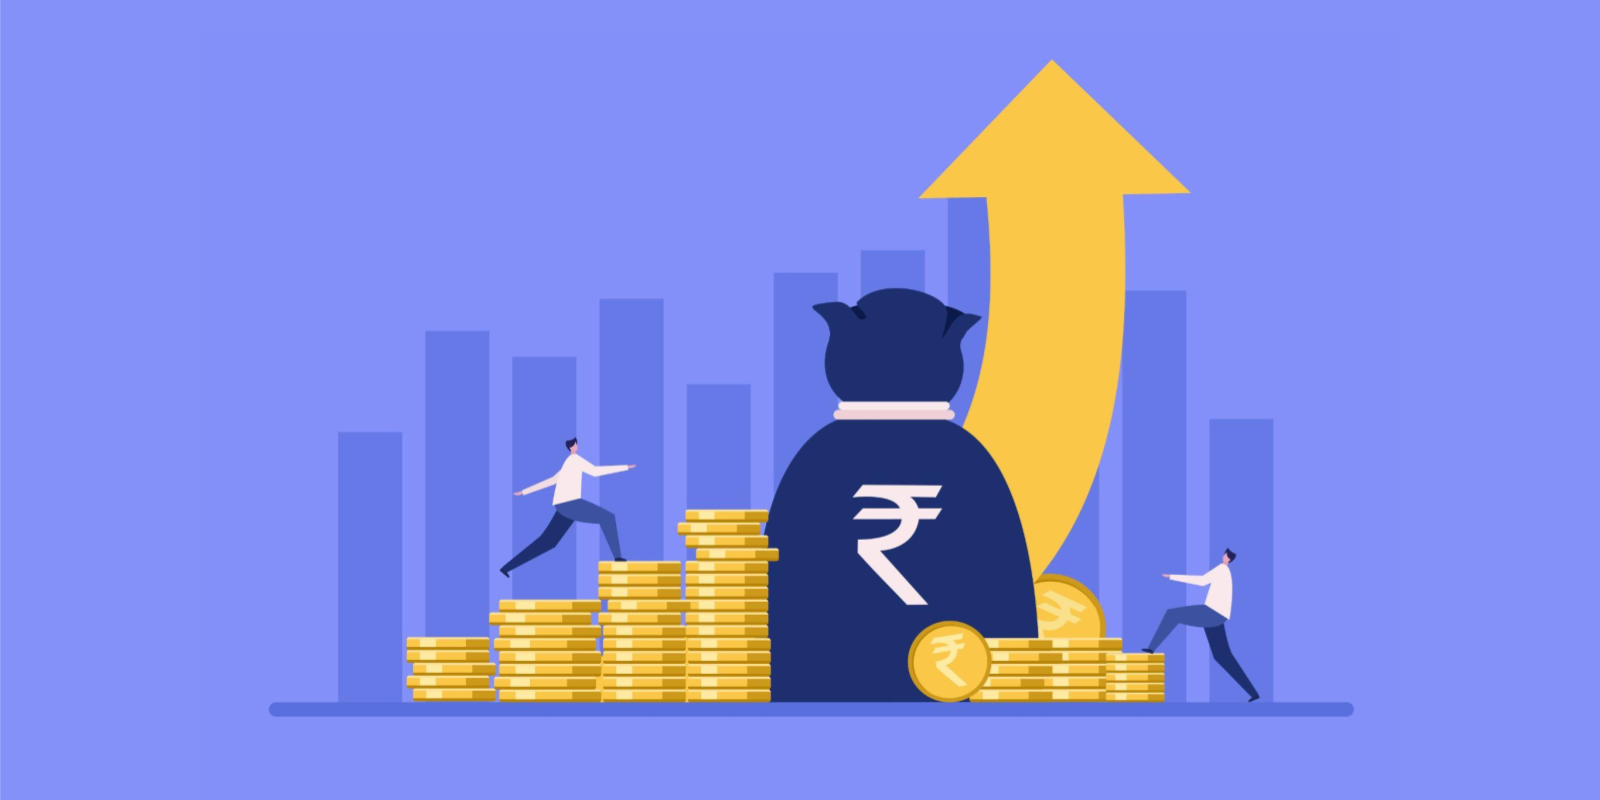 How domestic funding in startups can make India aatmanirbhar